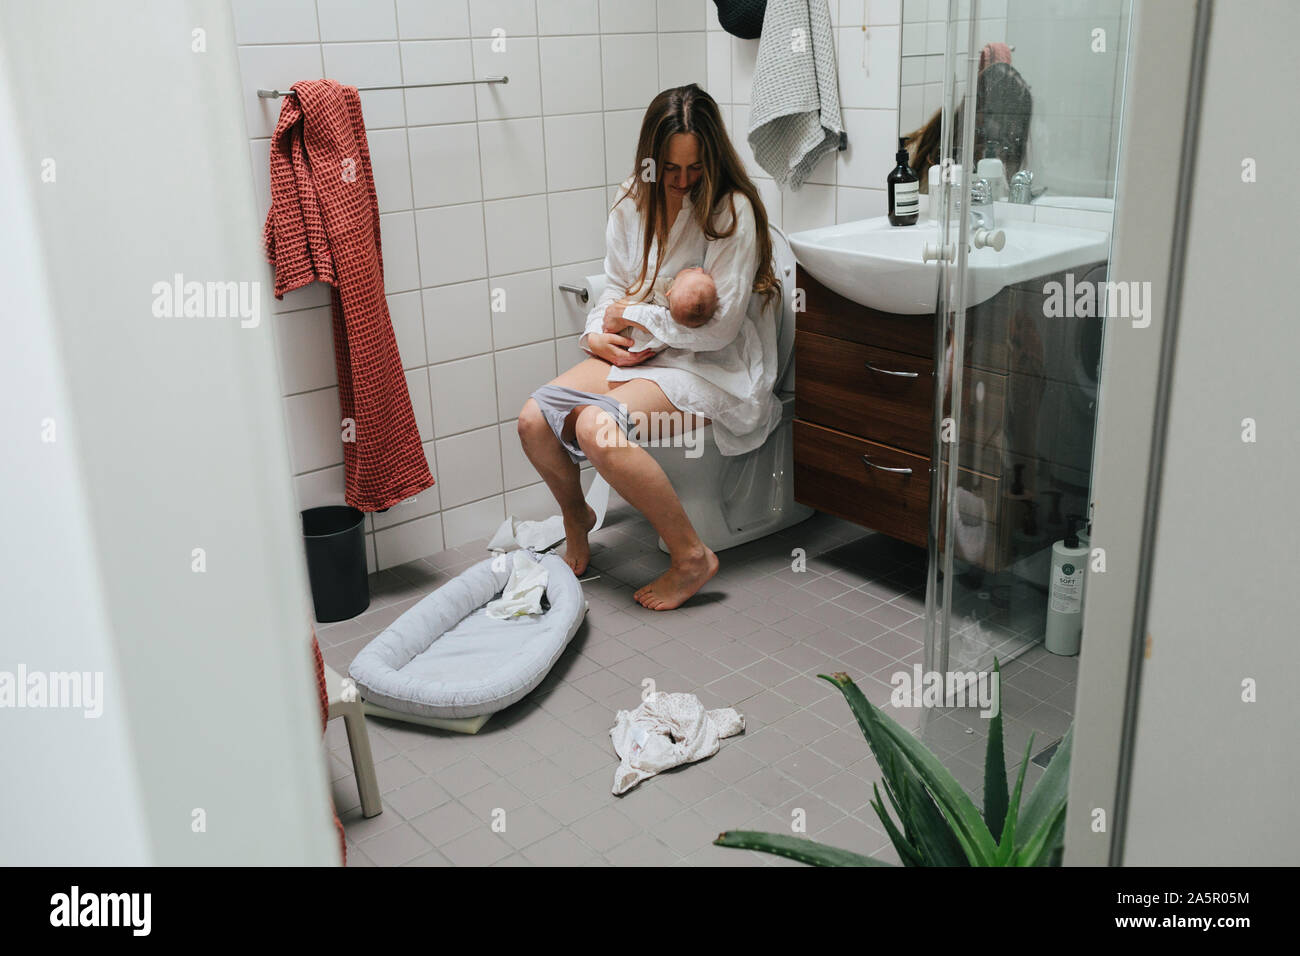 Blond Girl Peeing Seated On A Toilet With Her Panties Down Isolated On  White Background Stock Photo, Picture and Royalty Free Image. Image  31616610.